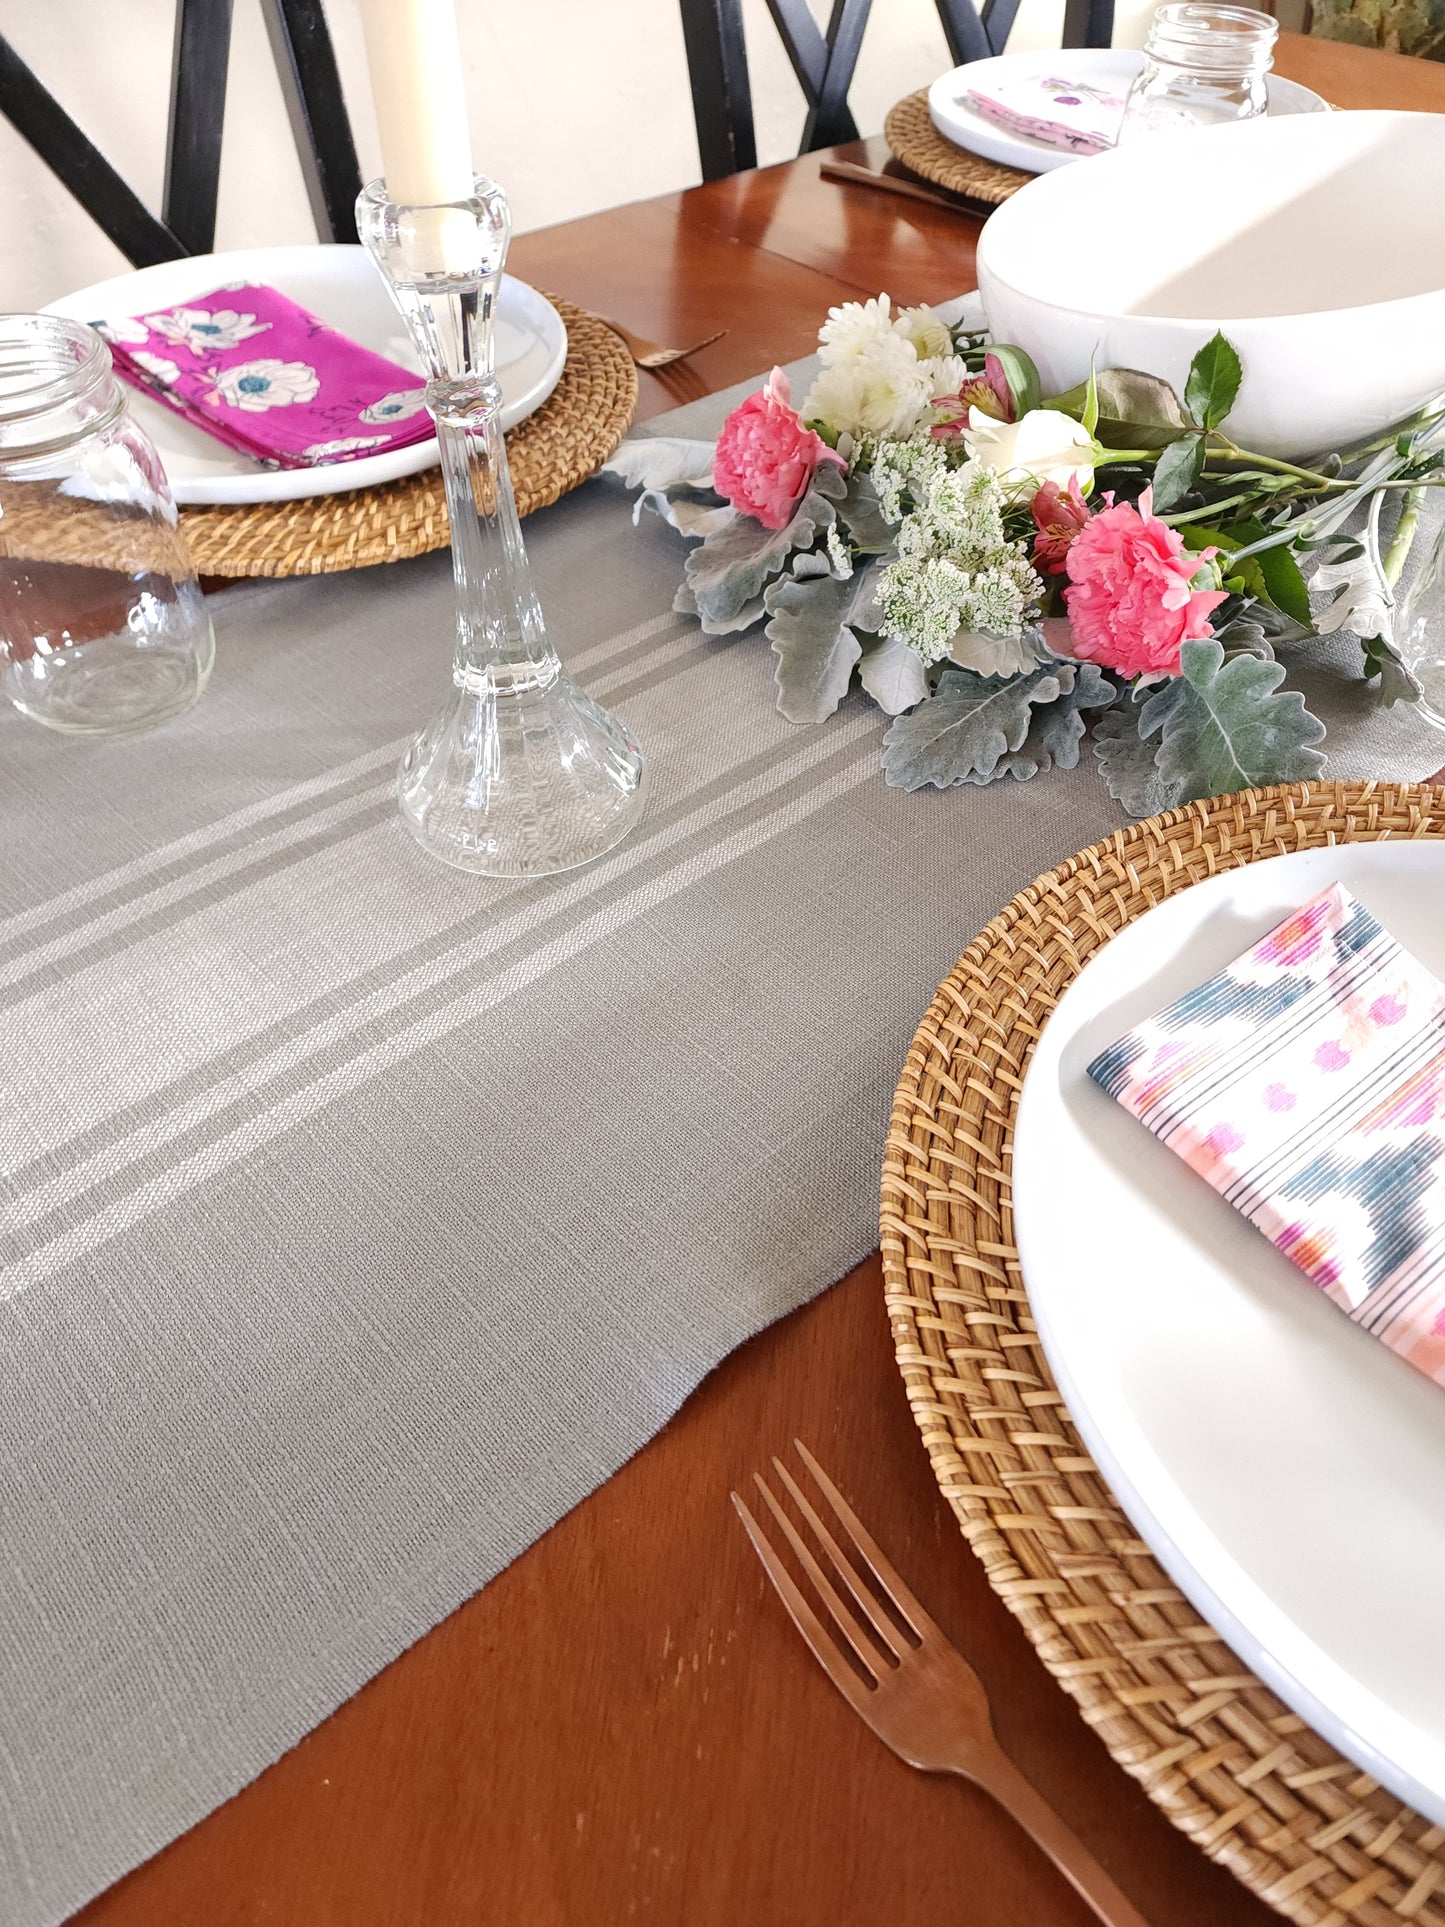 Gray and White Striped Table Runner